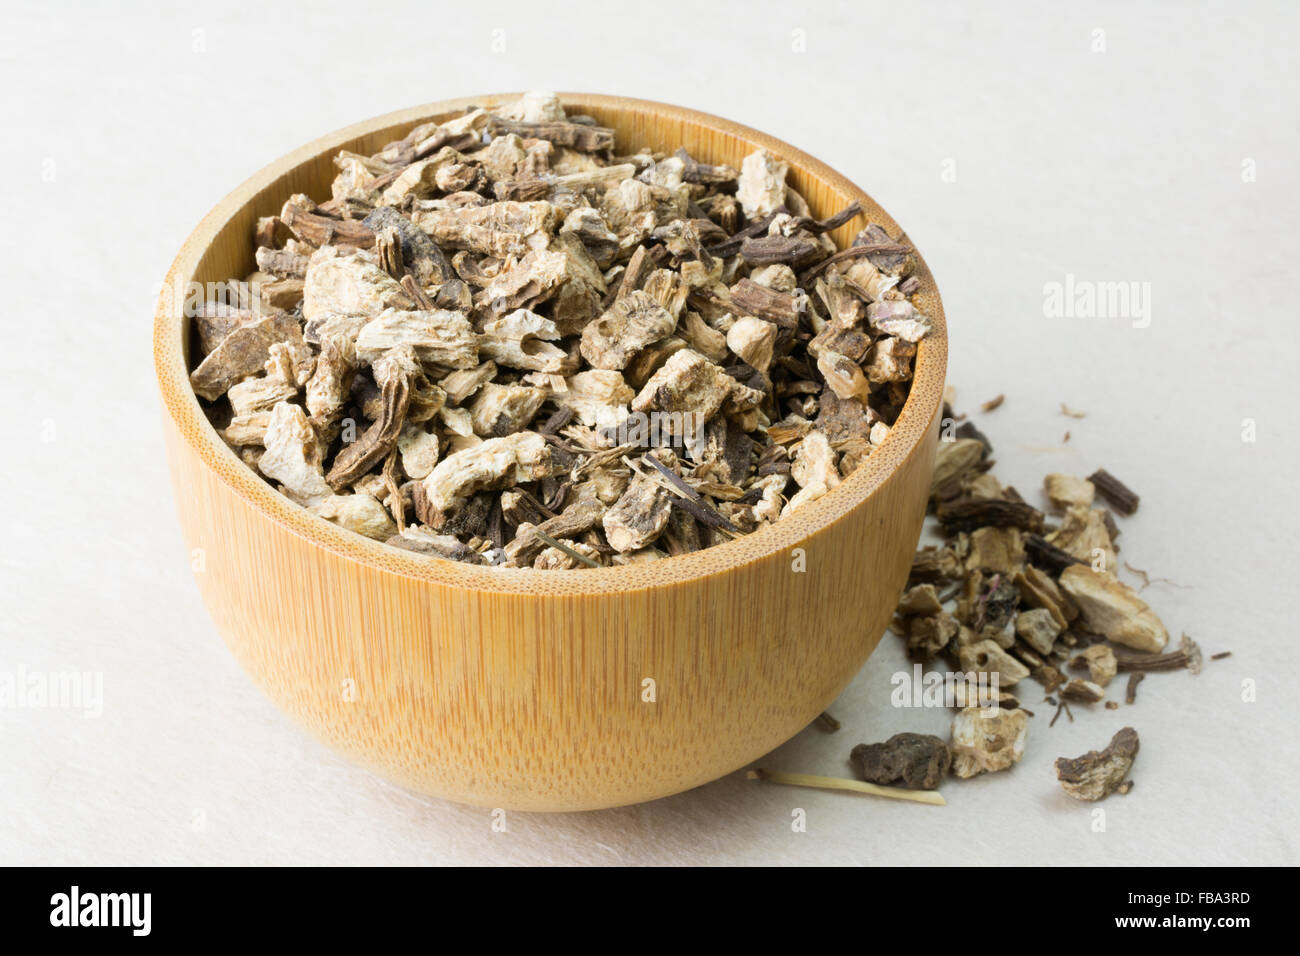 Chopped Angelica Root (Angelica archangelica) in a wooden cup Stock Photo